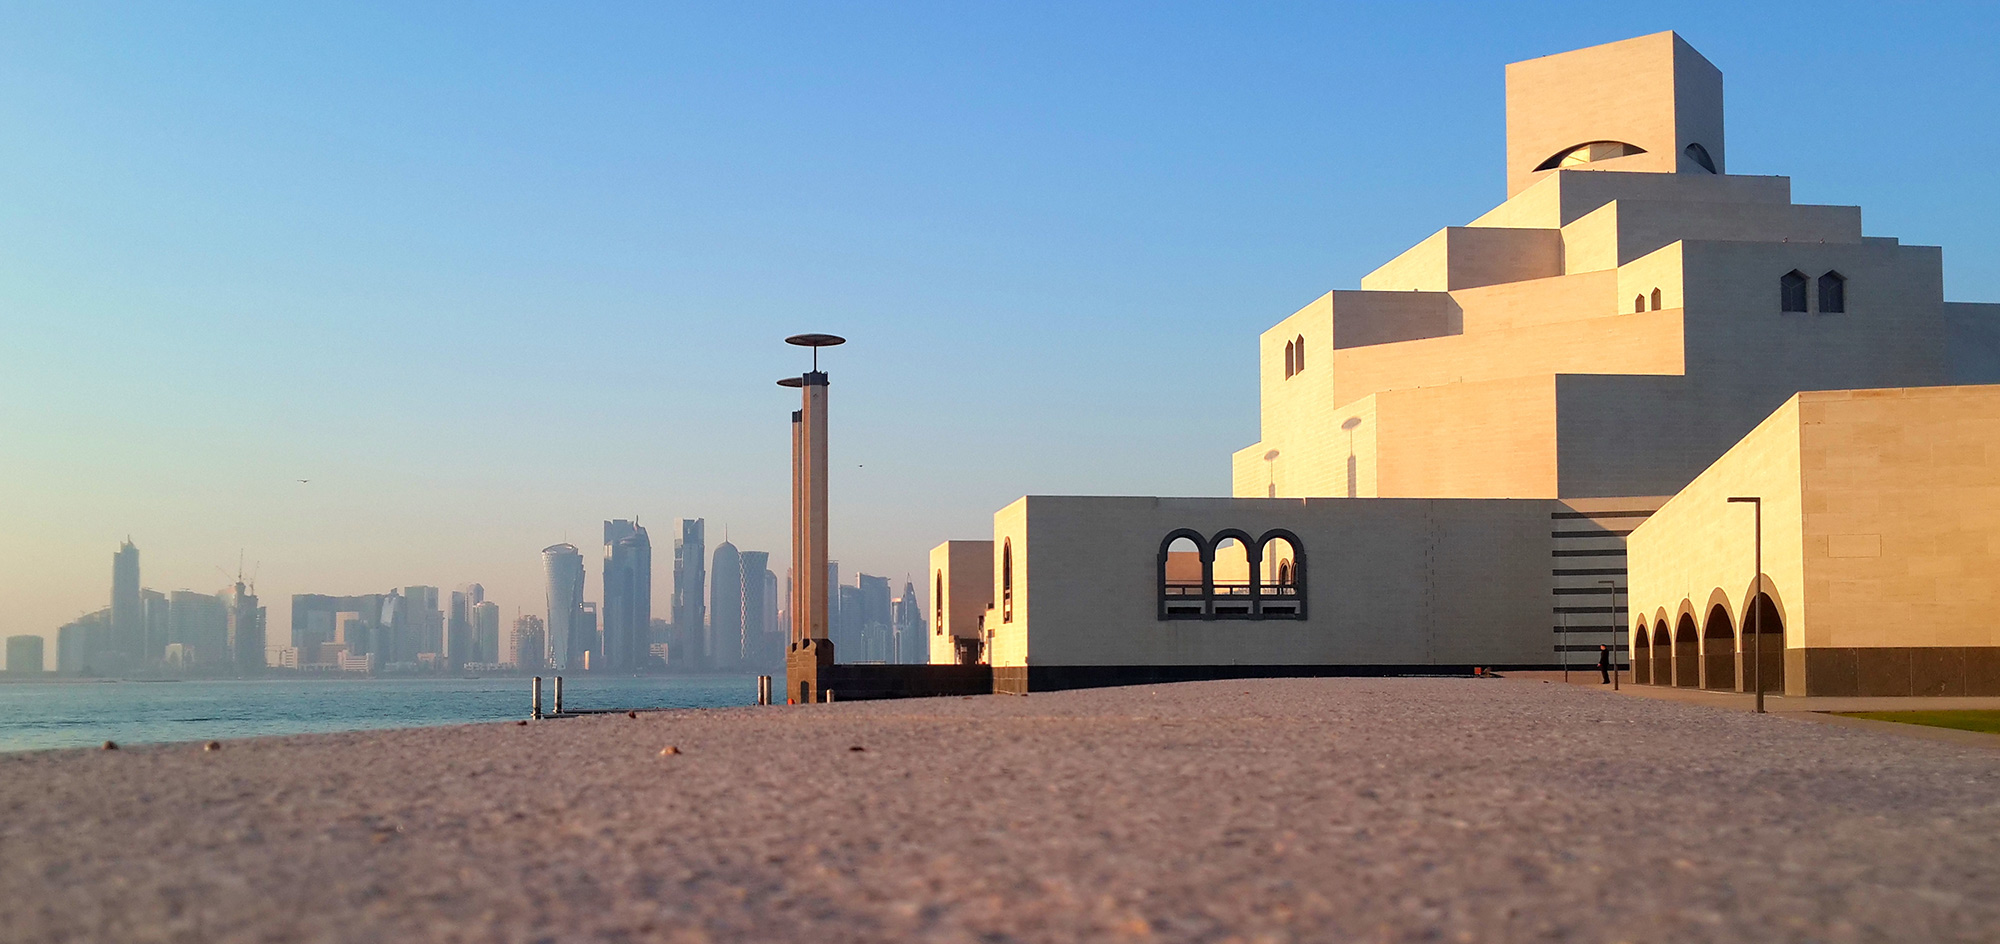 A popular venue, the Museum of Islamic Art in Doha was designed by I.M. Pei.